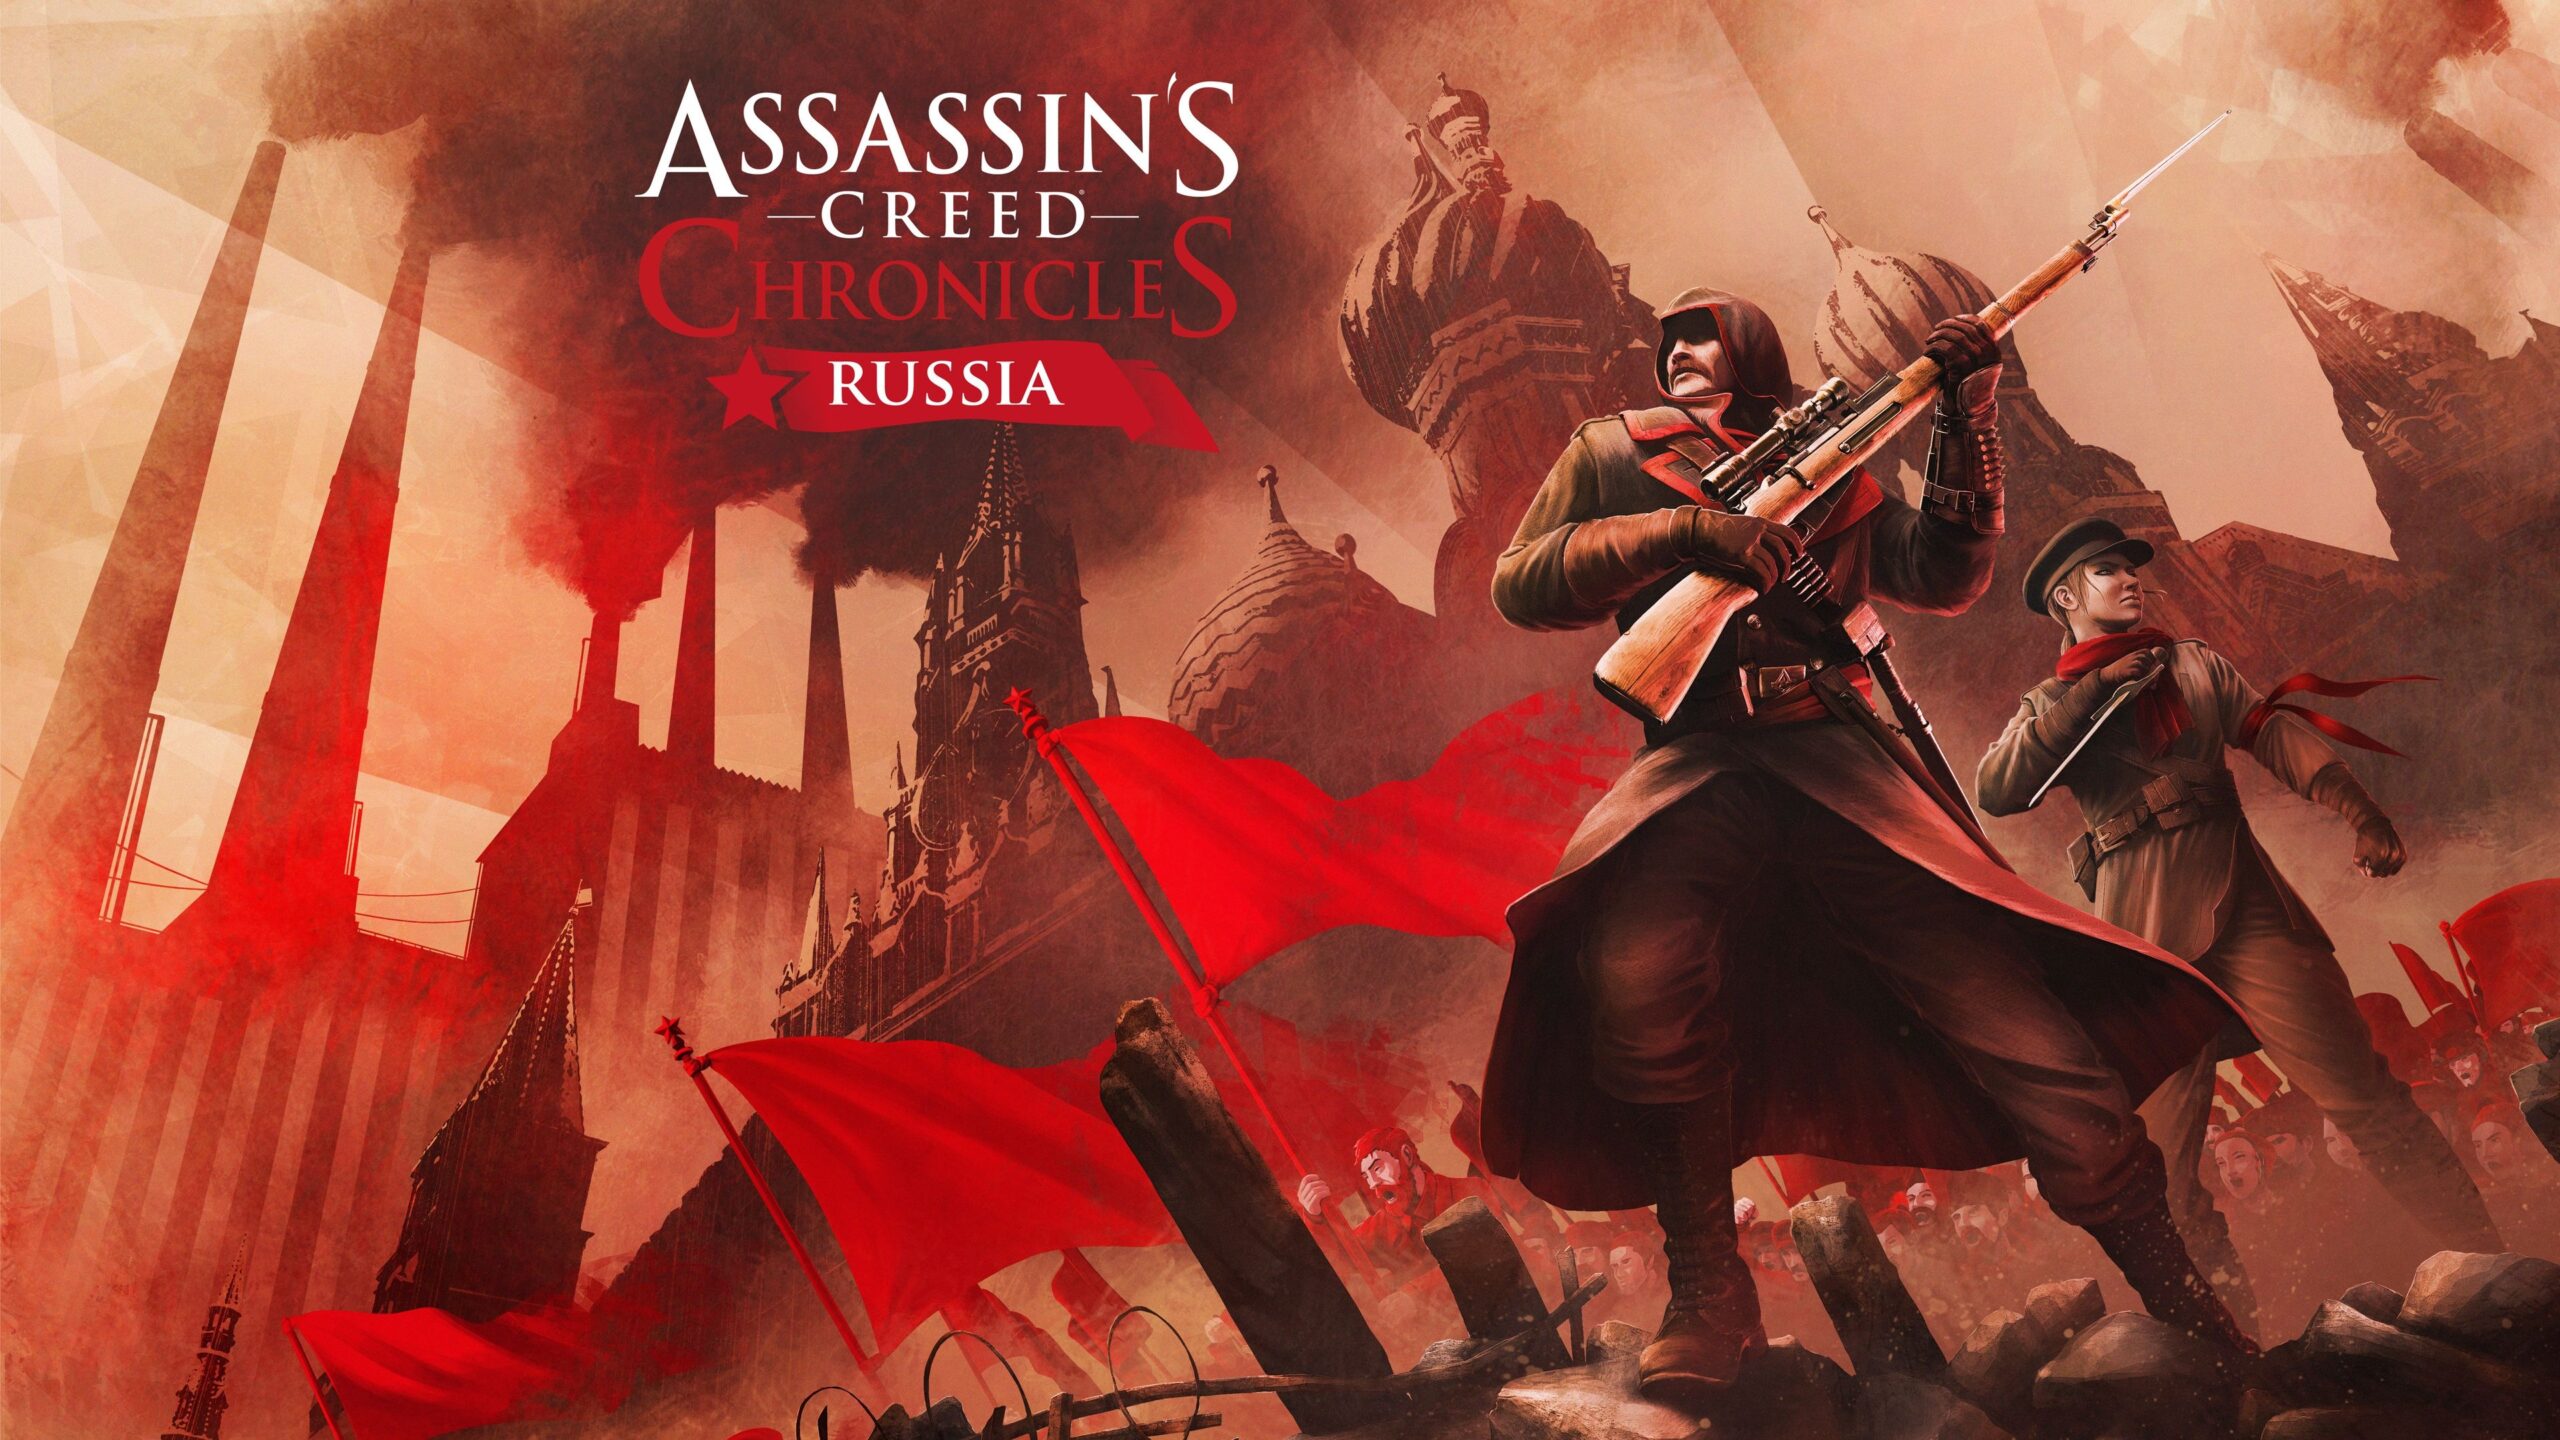 Assassin’s Creed Chronicles Russia Wallpapers in K format for free